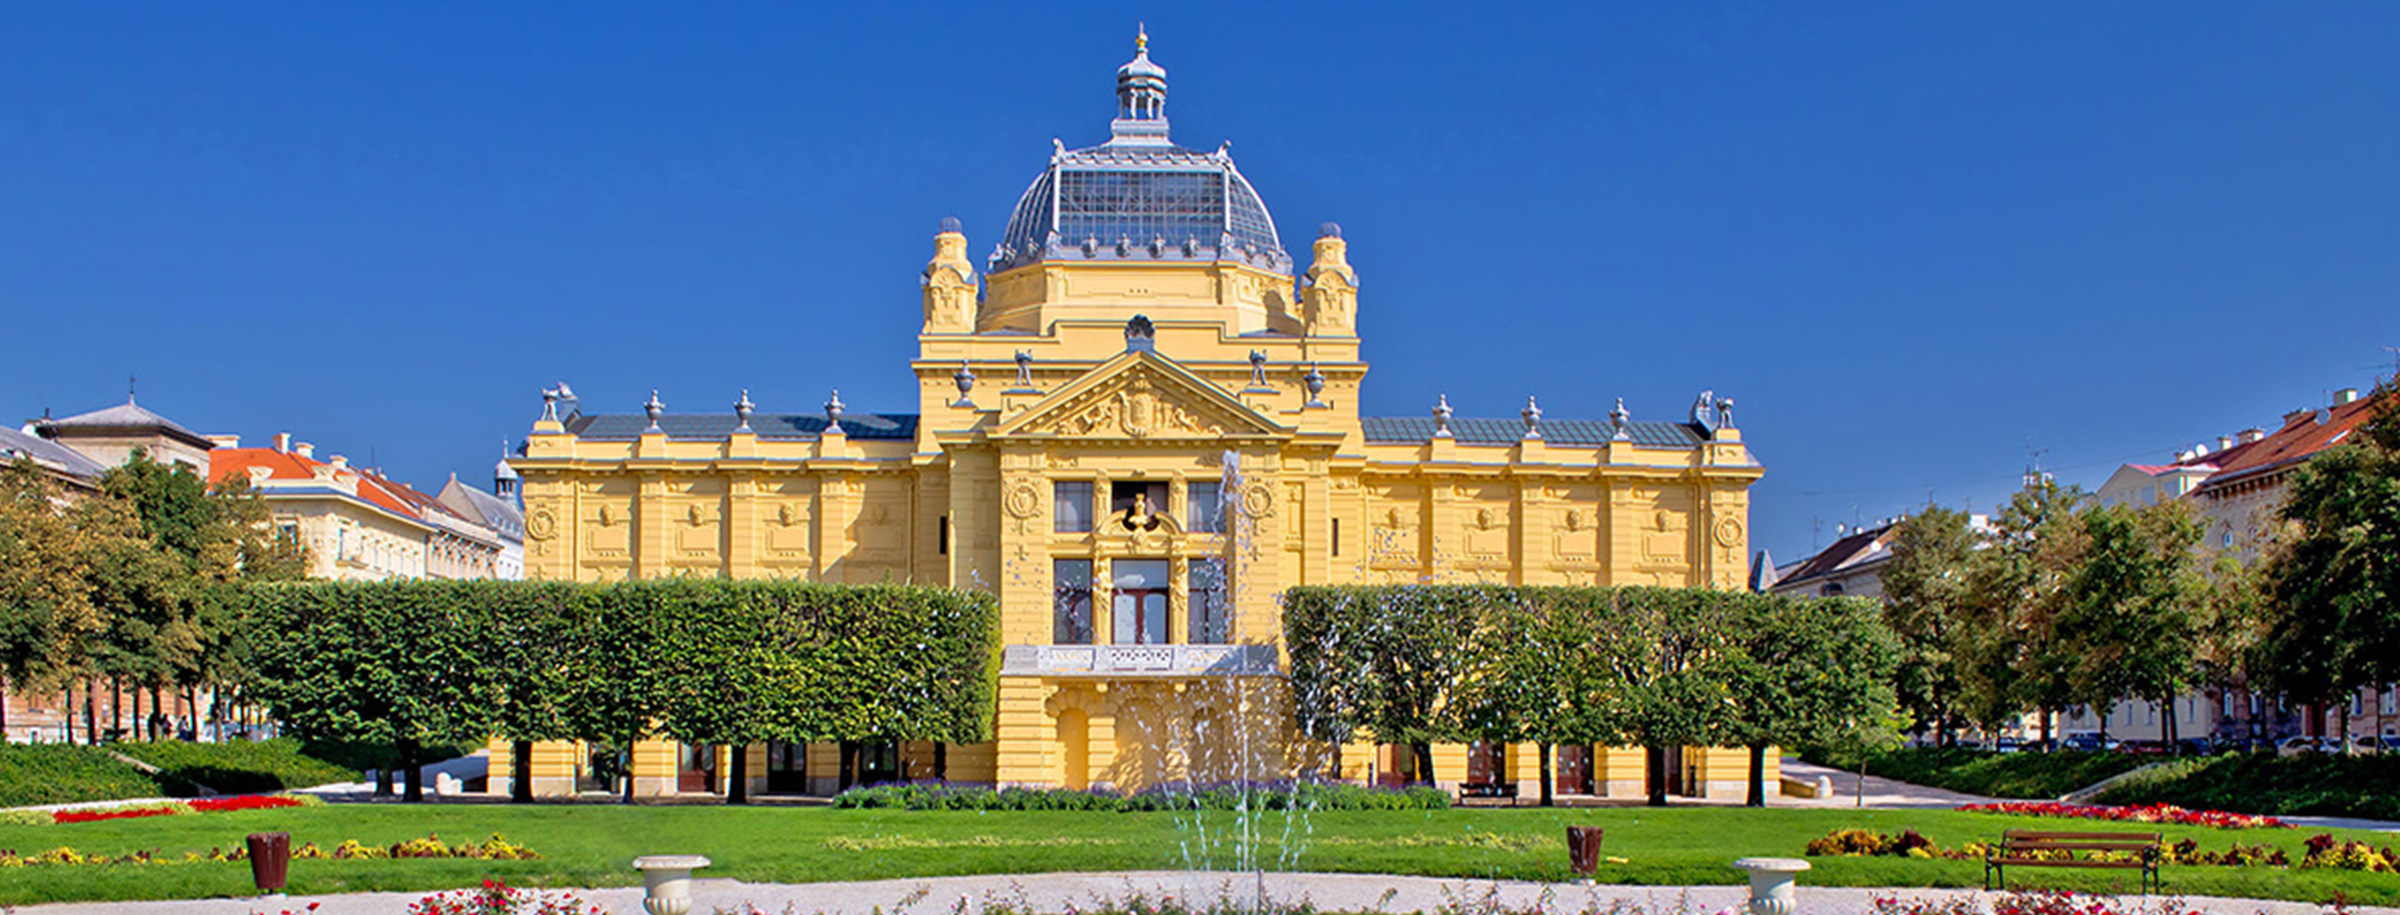 5 things to do in Zagreb